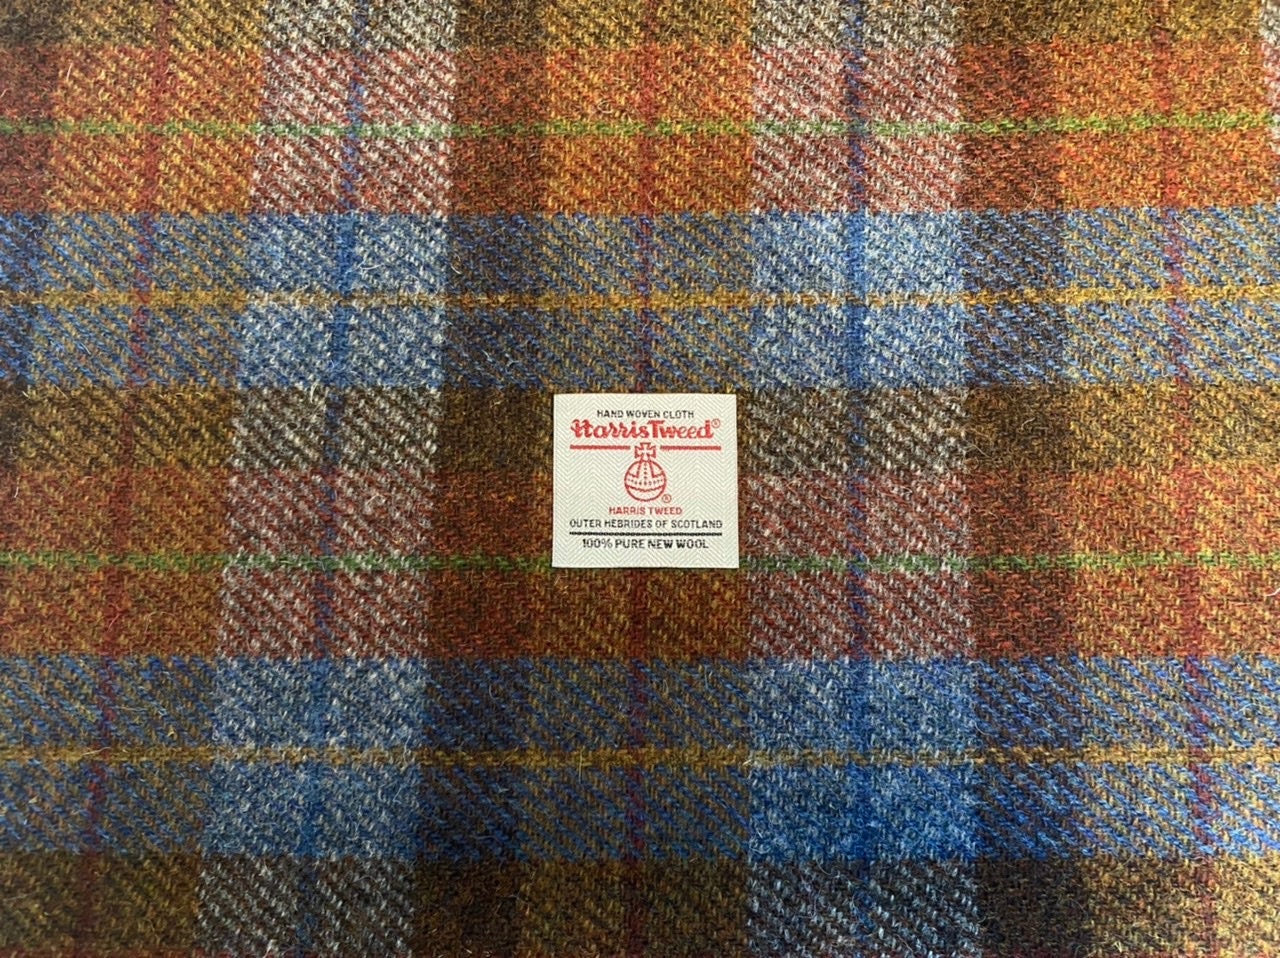 Harris Tweed Fabric Rust Orange & Blue Check in All Sizes Sold - Etsy